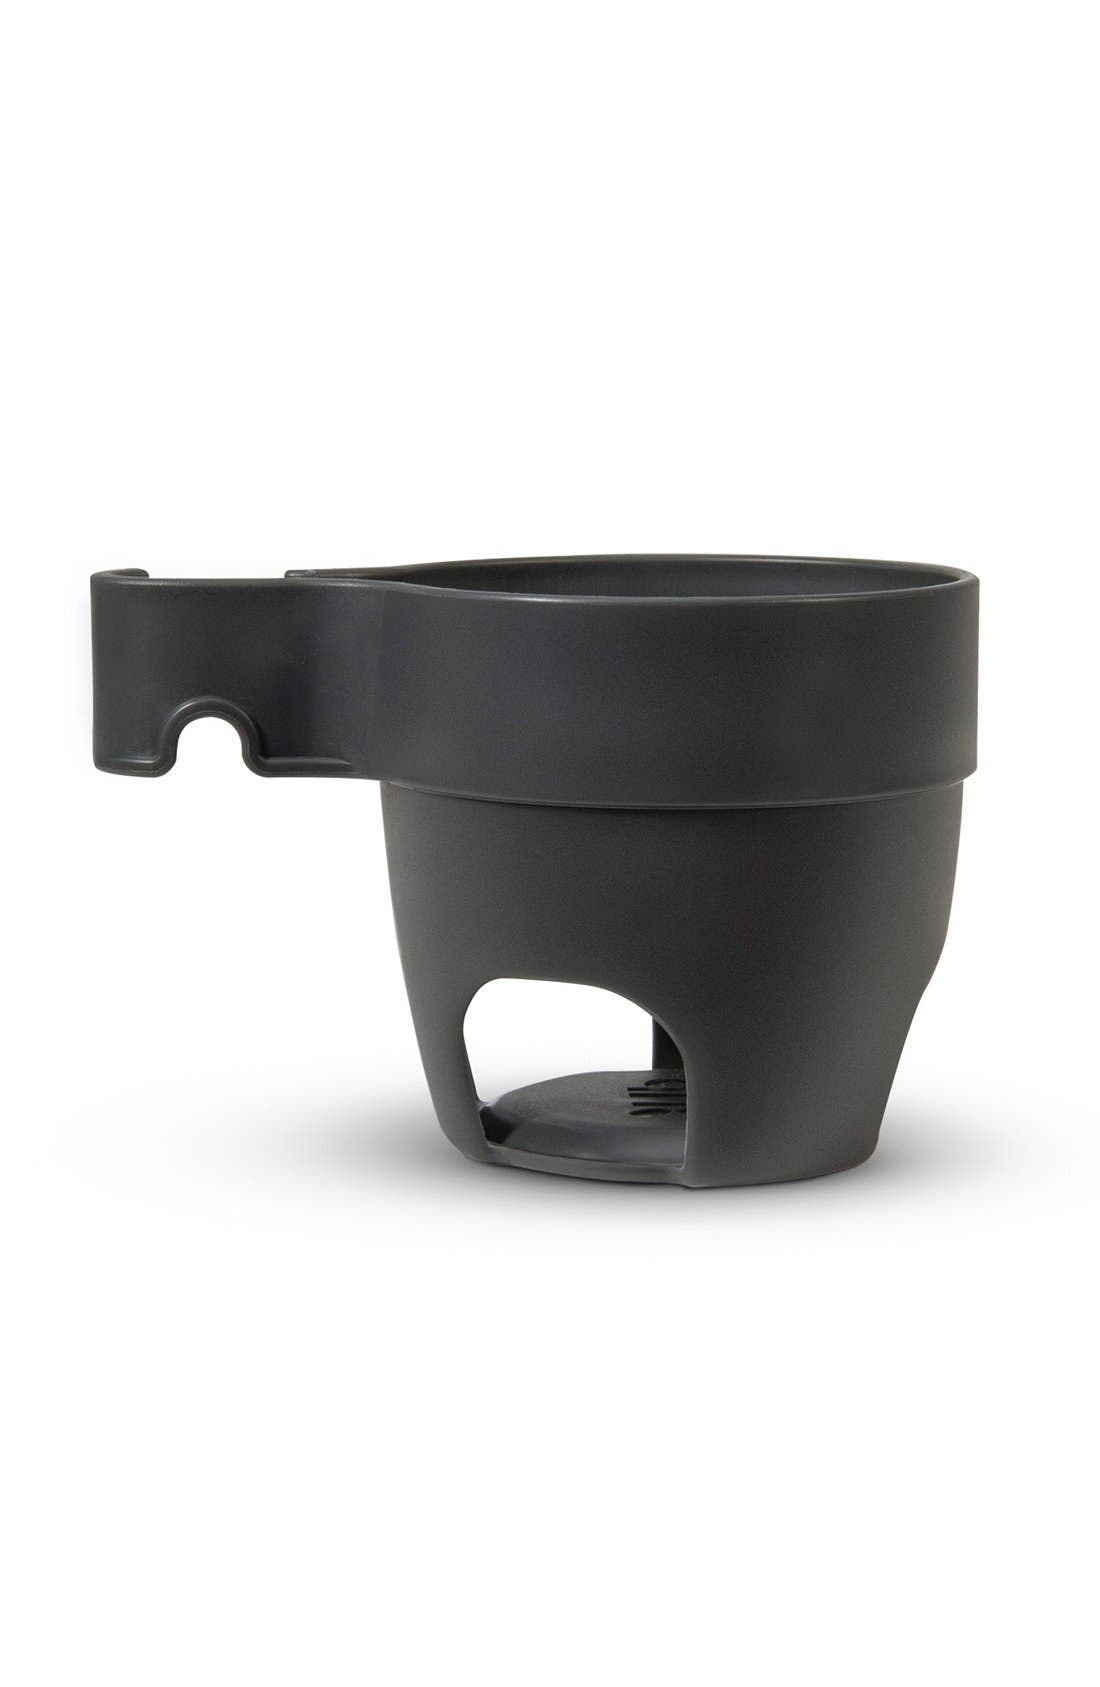 uppababy cup holder canada